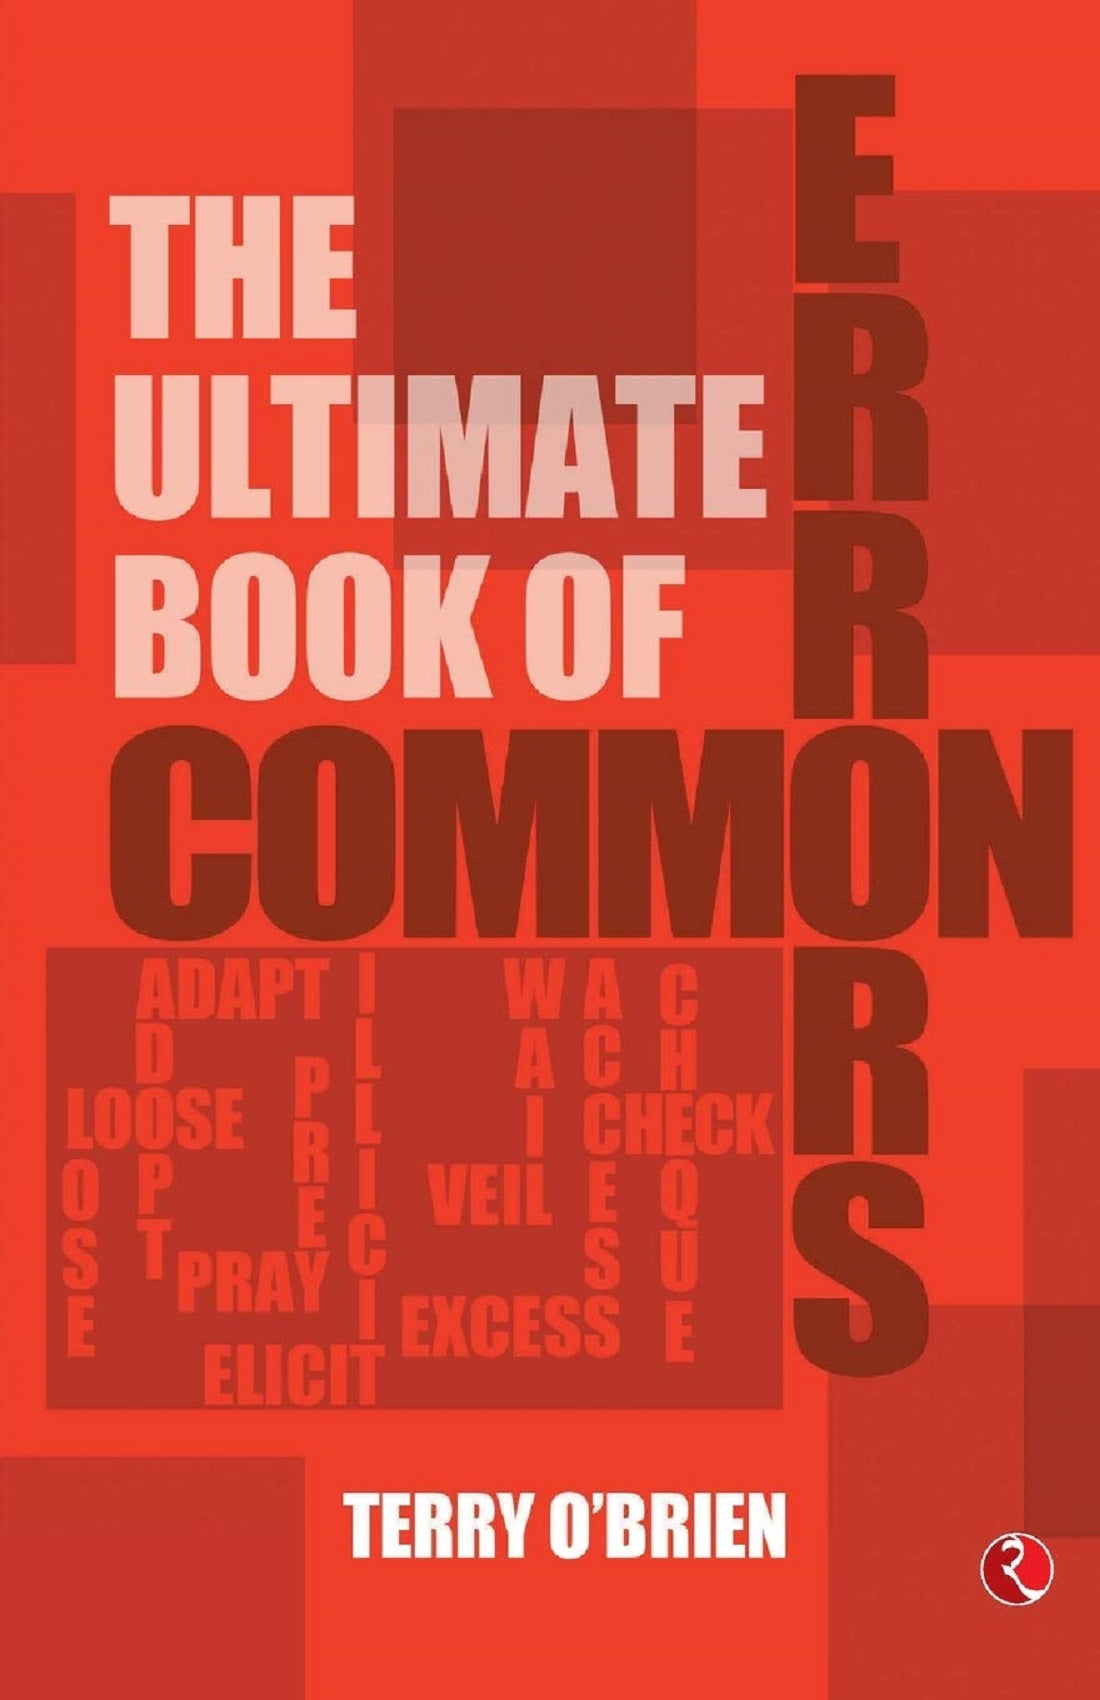 THE ULTIMATE BOOK OF COMMON ERRORS IN ENGLISH